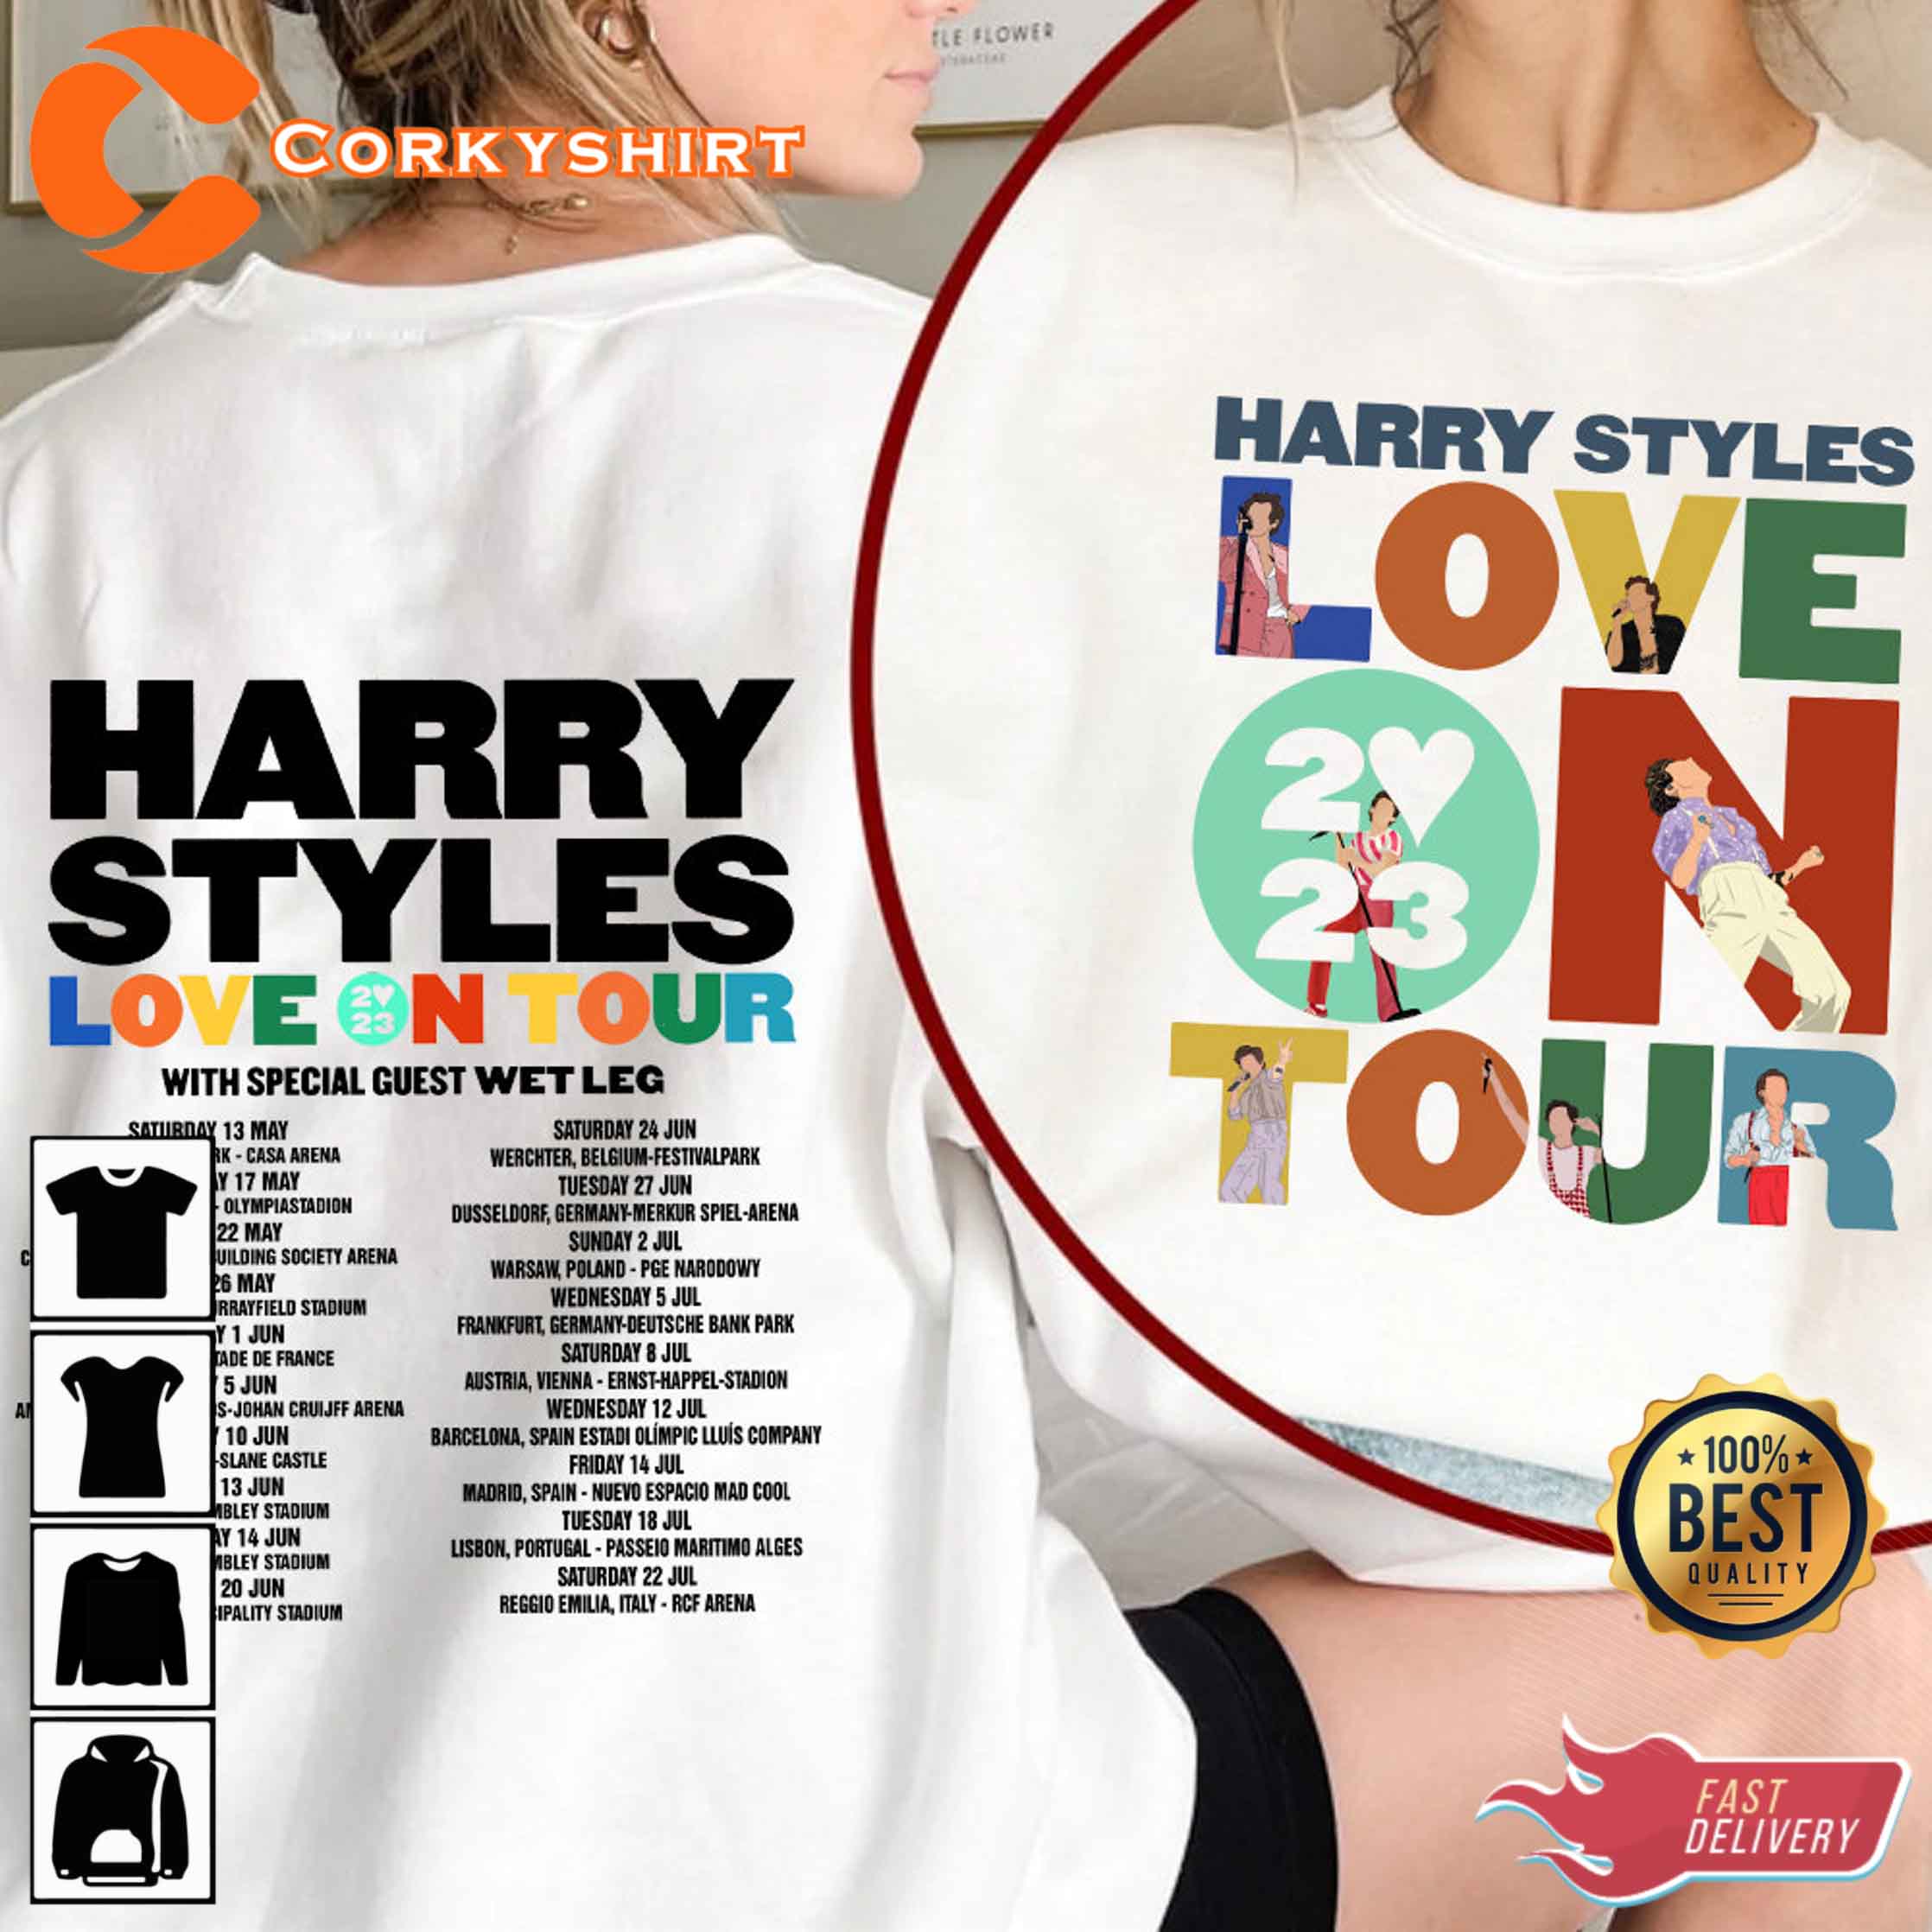 https://images.corkyshirt.com/wp-content/uploads/2023/01/Harry-Styles-Love-On-Tour-With-Special-Guest-Wet-Leg-T-shirt-2.jpg